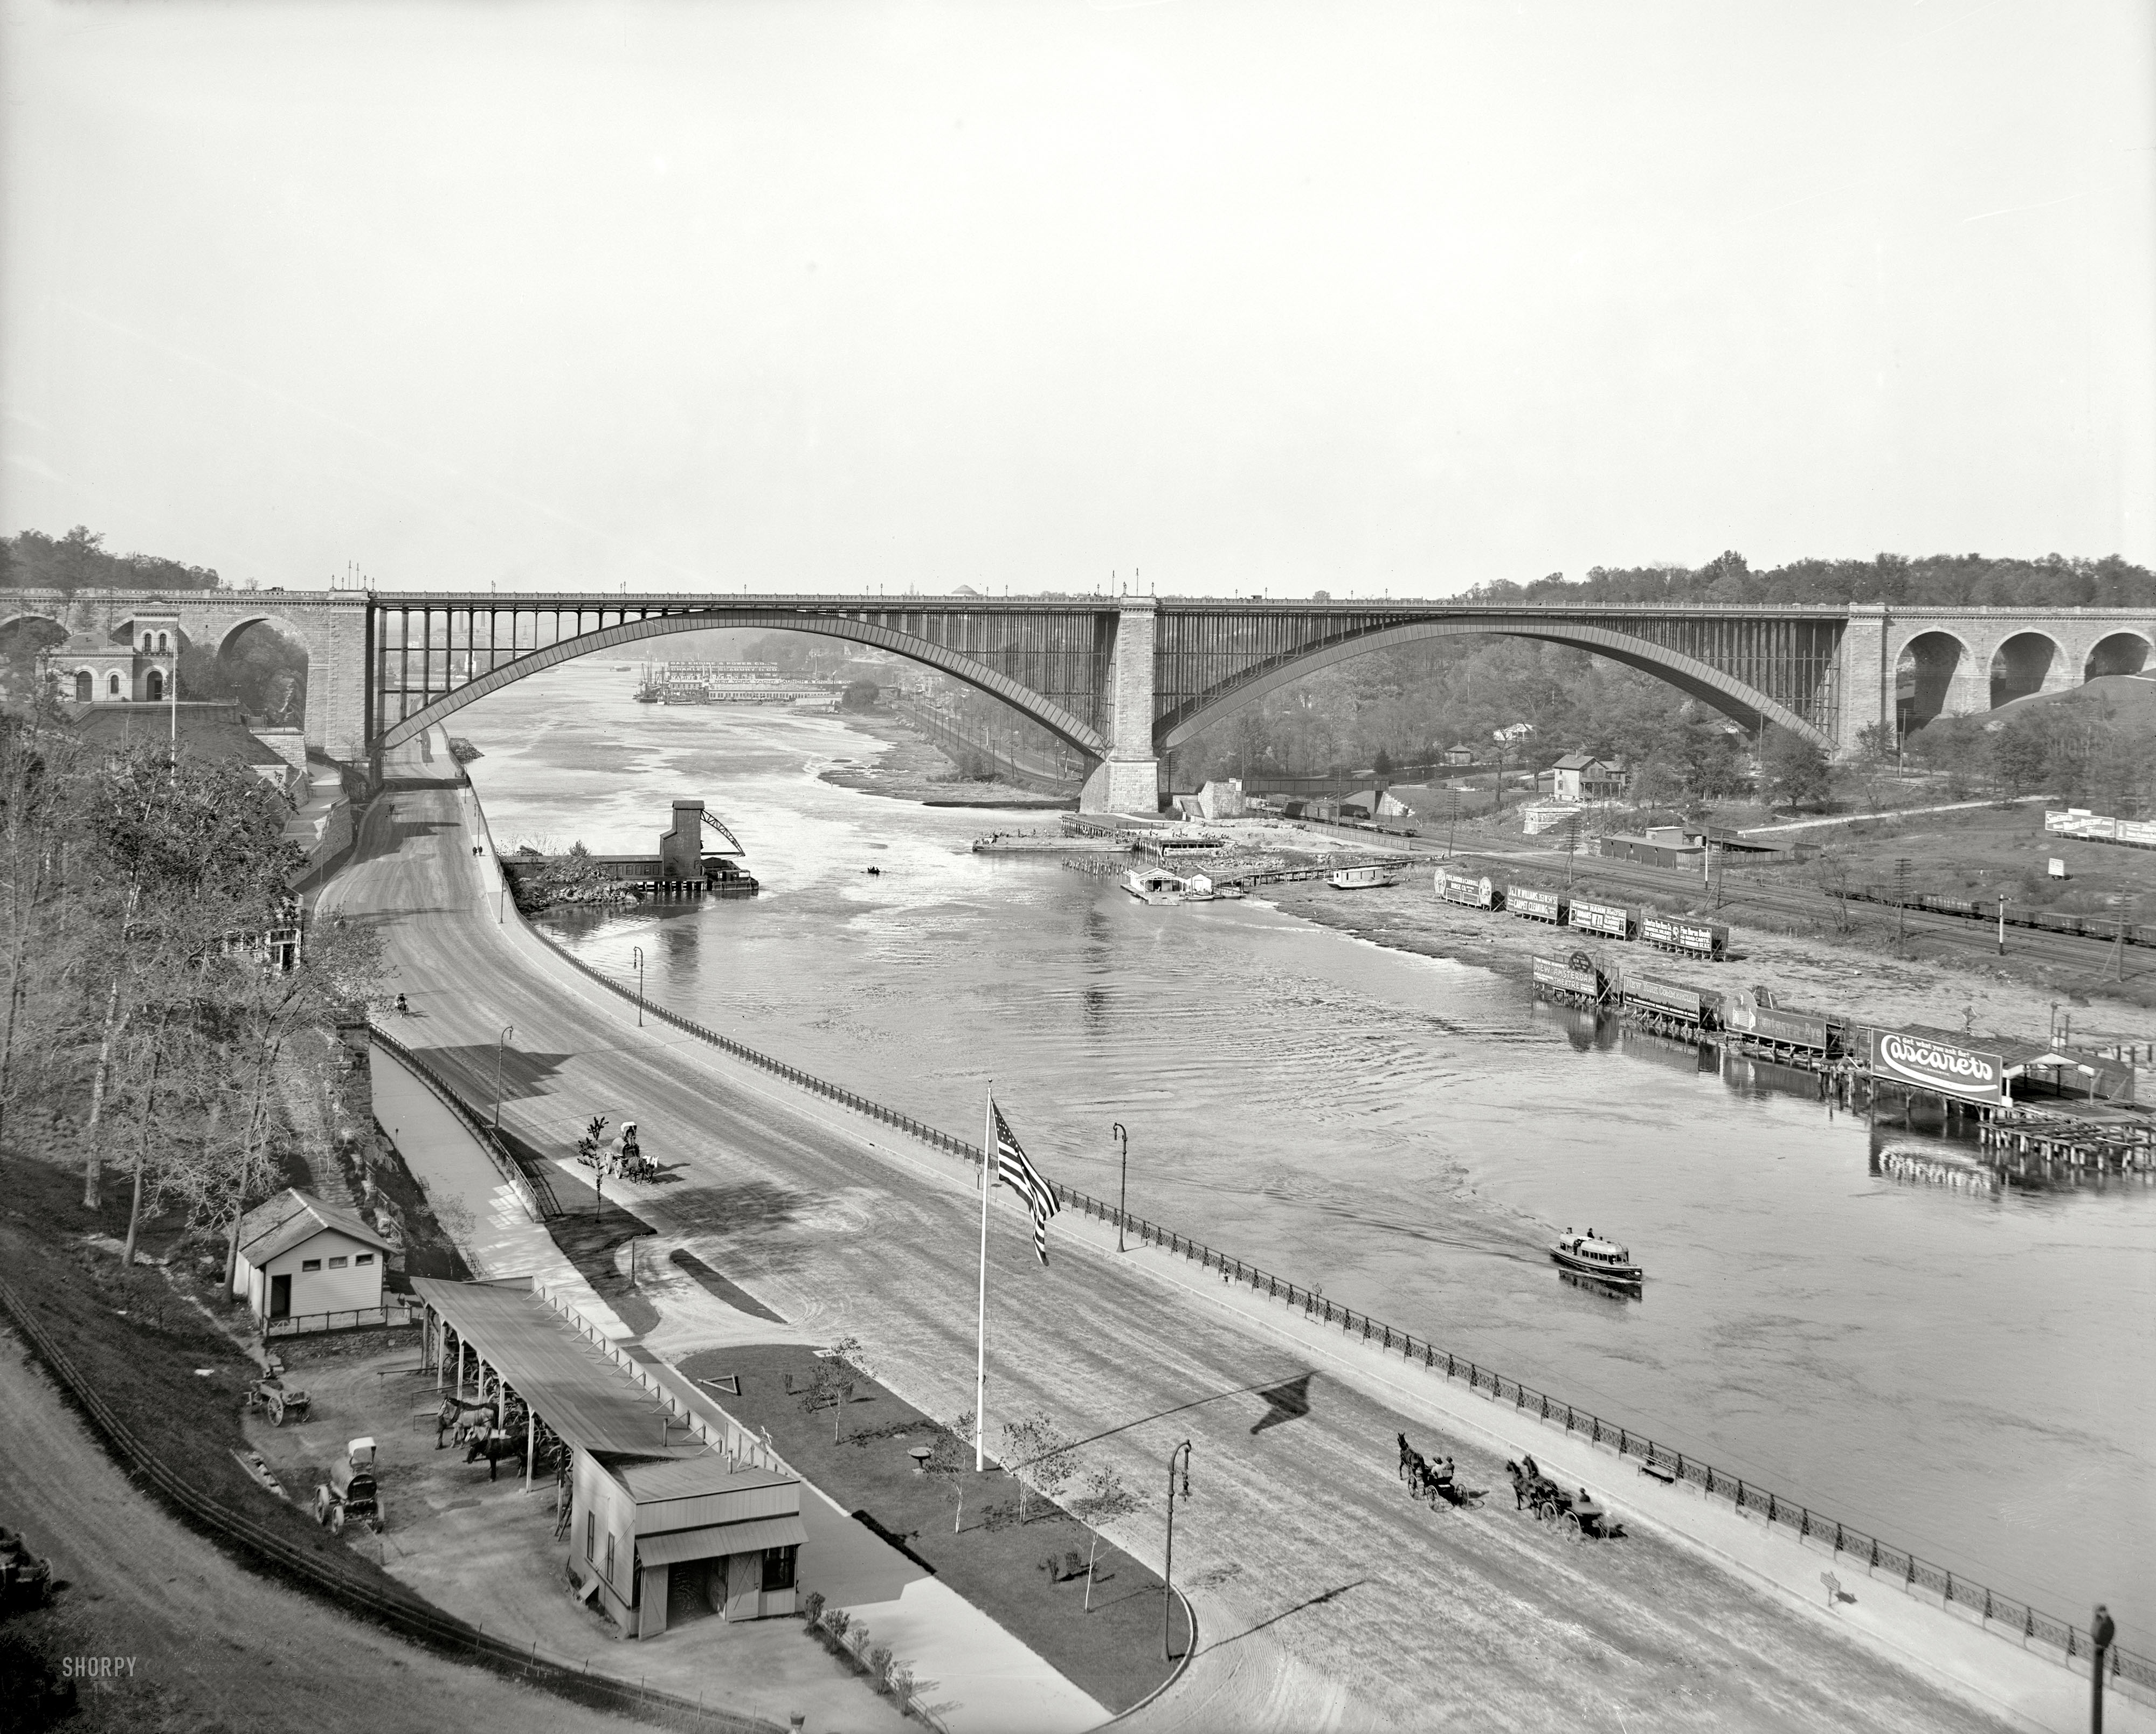 New York circa 1905. "The Harlem River from High Bridge. View of Harlem River Speedway and Washington Bridge." 8x10 inch glass negative. View full size.